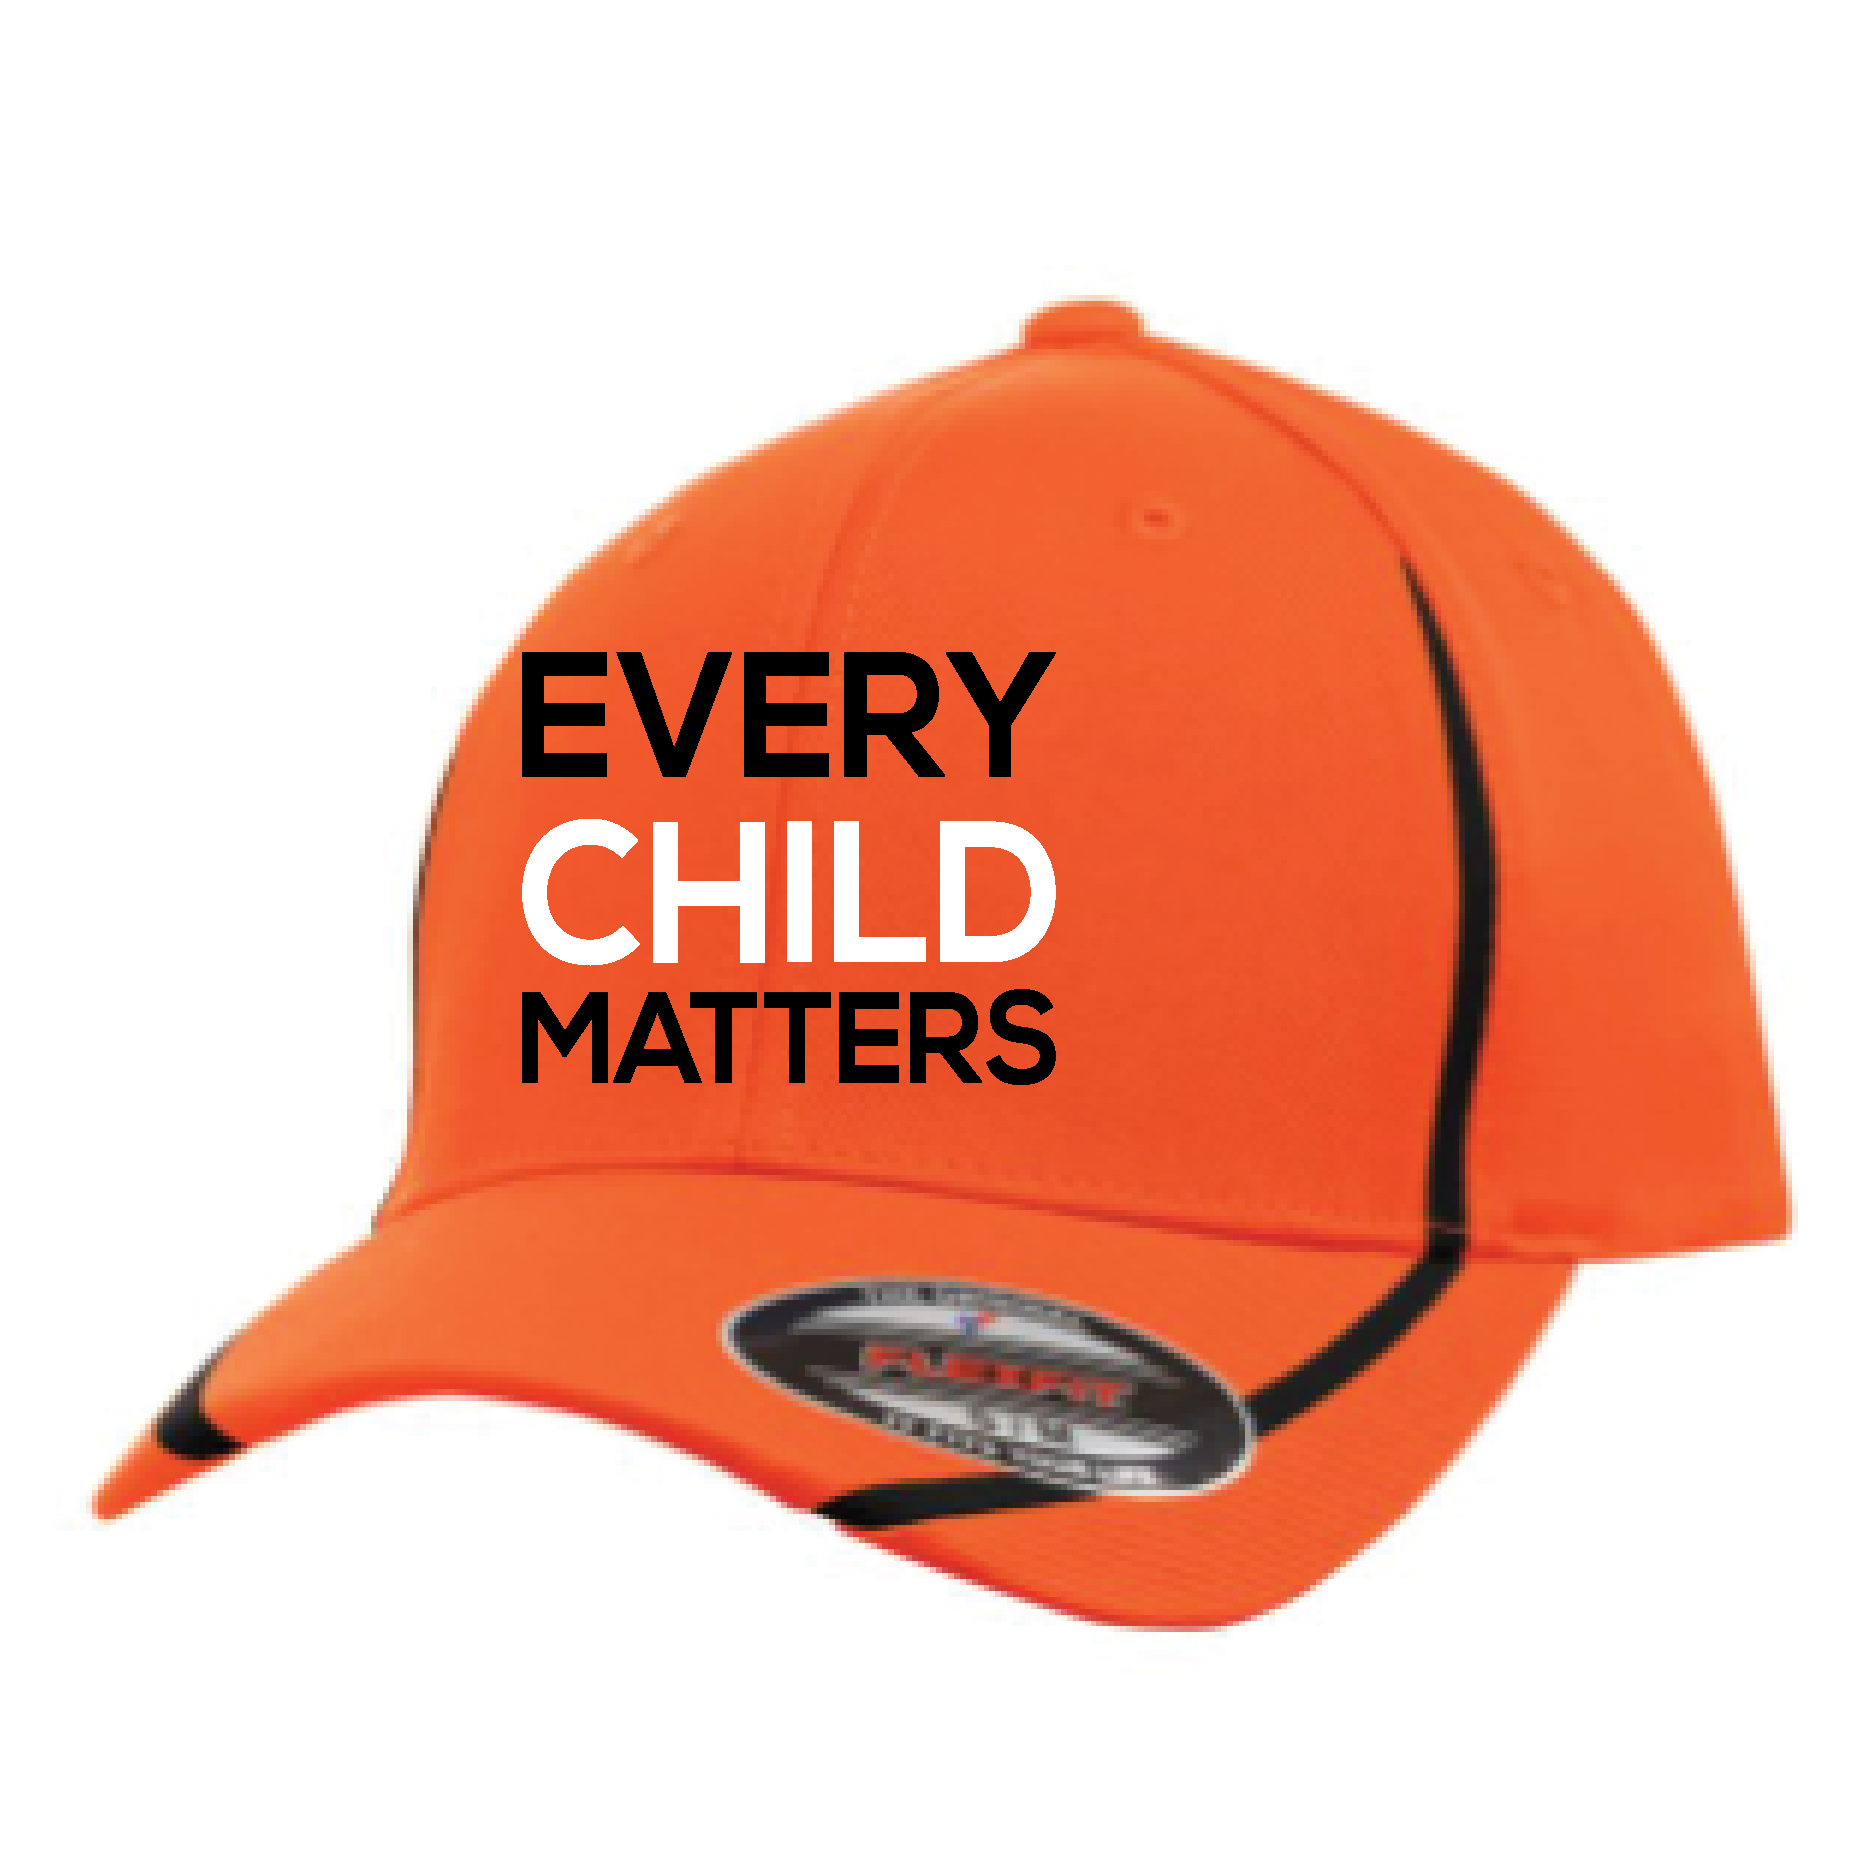 TeamFS Orange Day ATC Flex Fit Performance Hat Stitched with Every